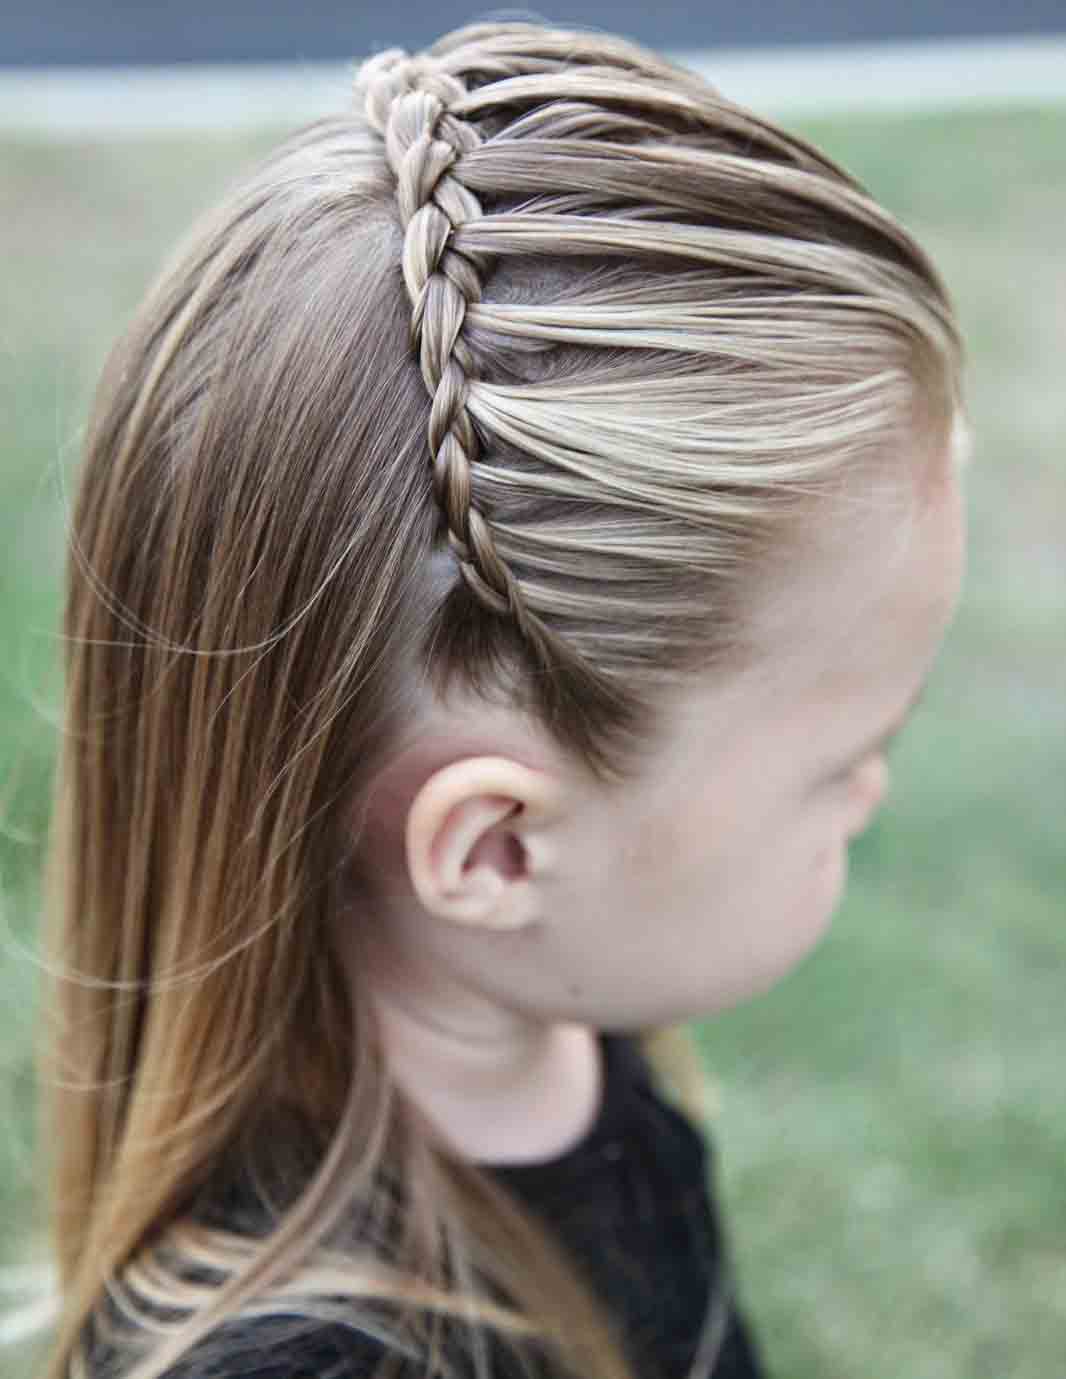 little girls hairstyles for eid 2019 in pakistan | fashioneven